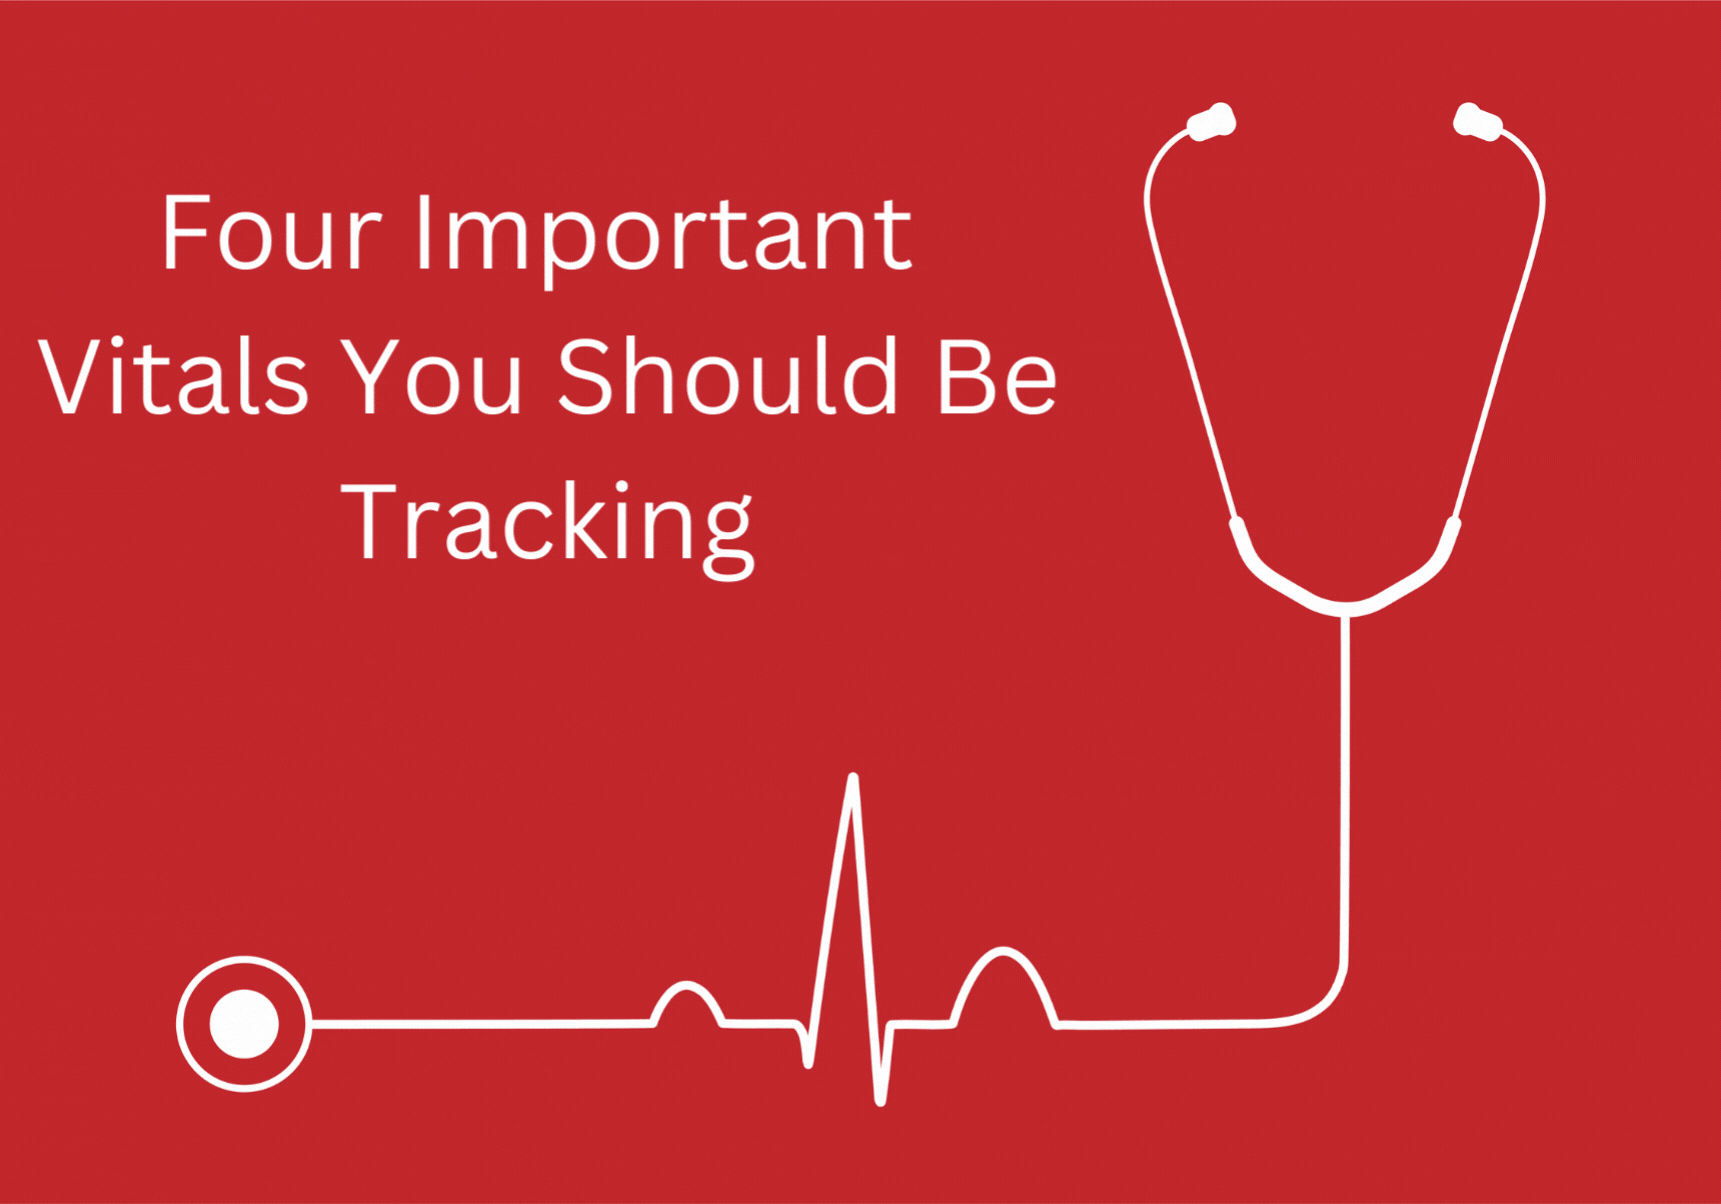 4 healthy vitals to track